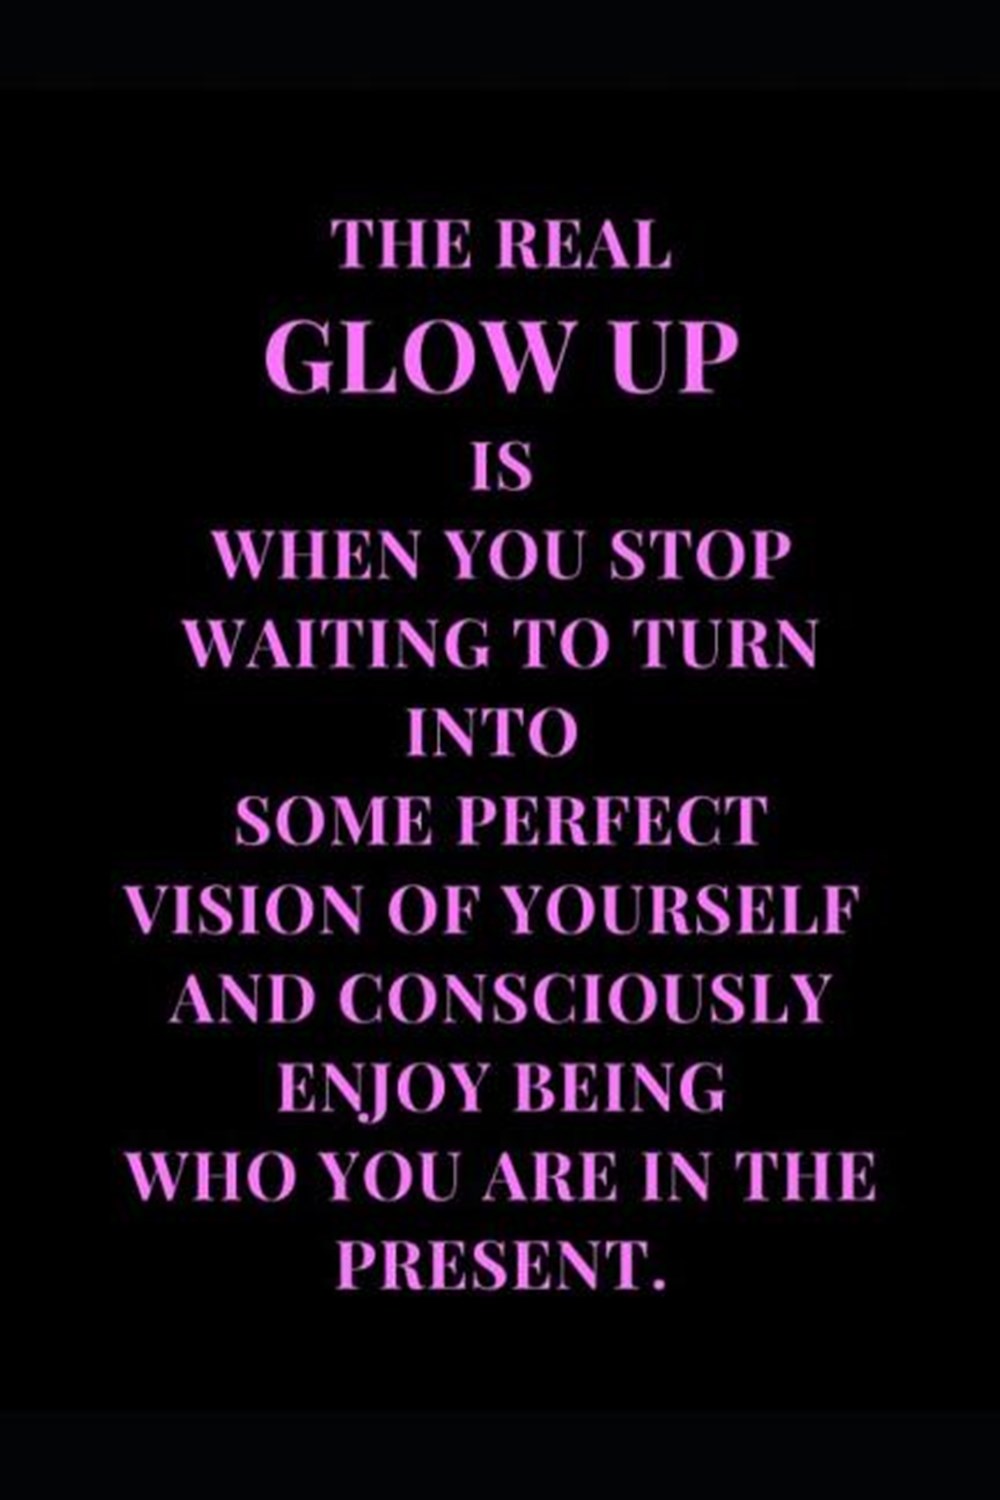 Real Glow Up Is When You Stop Waiting To Turn Into Some Perfect Vision Of Yourself And Consciously E